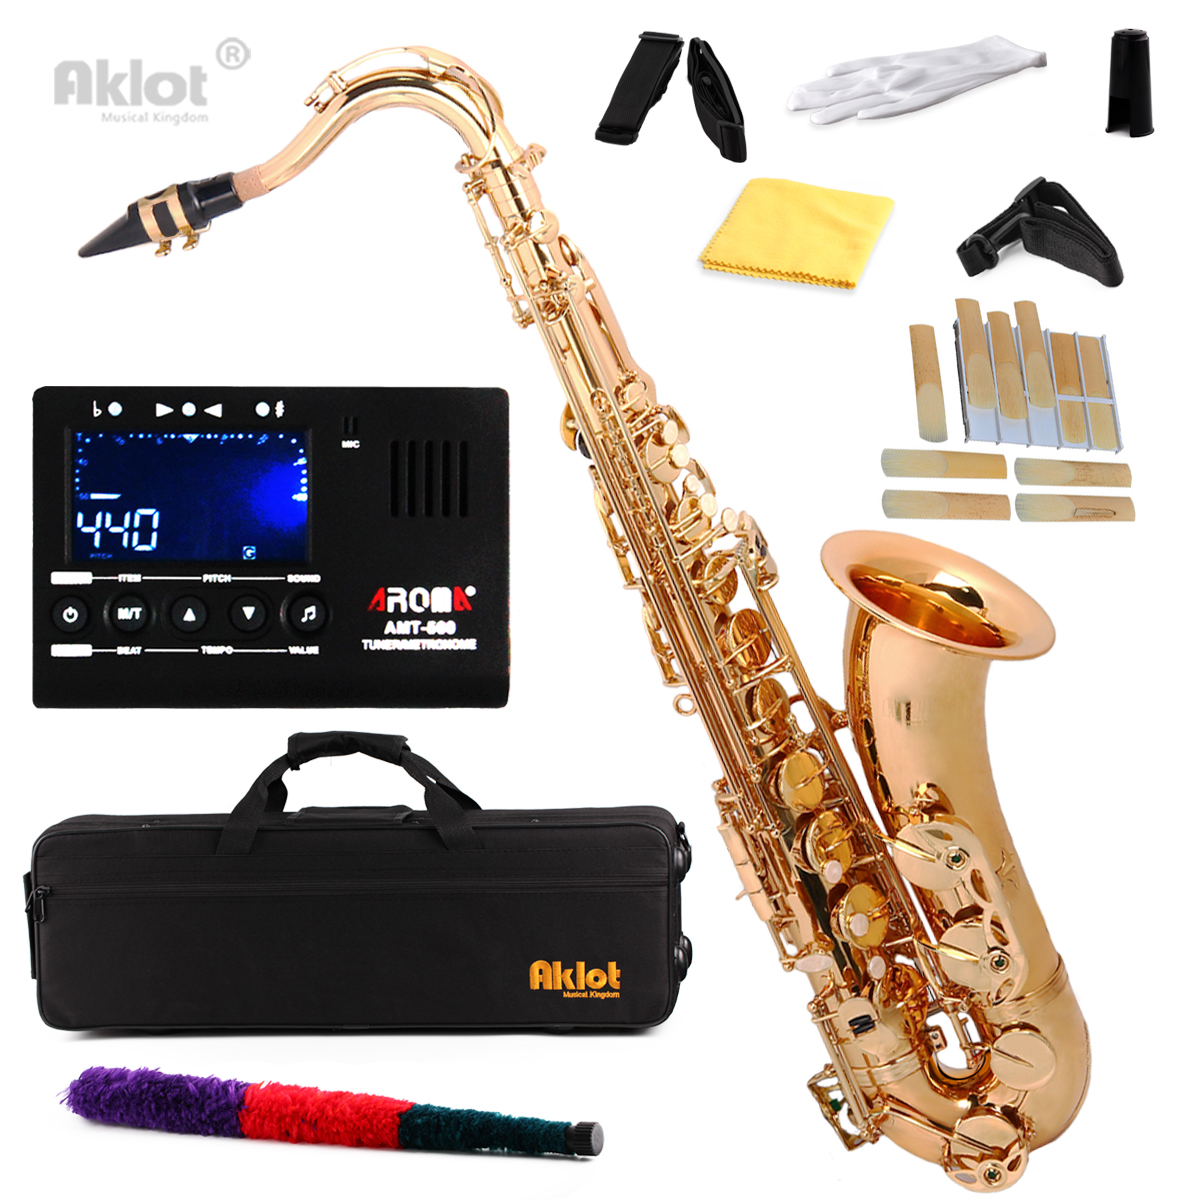 Aklot Bb Tenor Saxophone Sax Gold Lacquered with Neck Strap Reeds Cleacing Kit Tuner